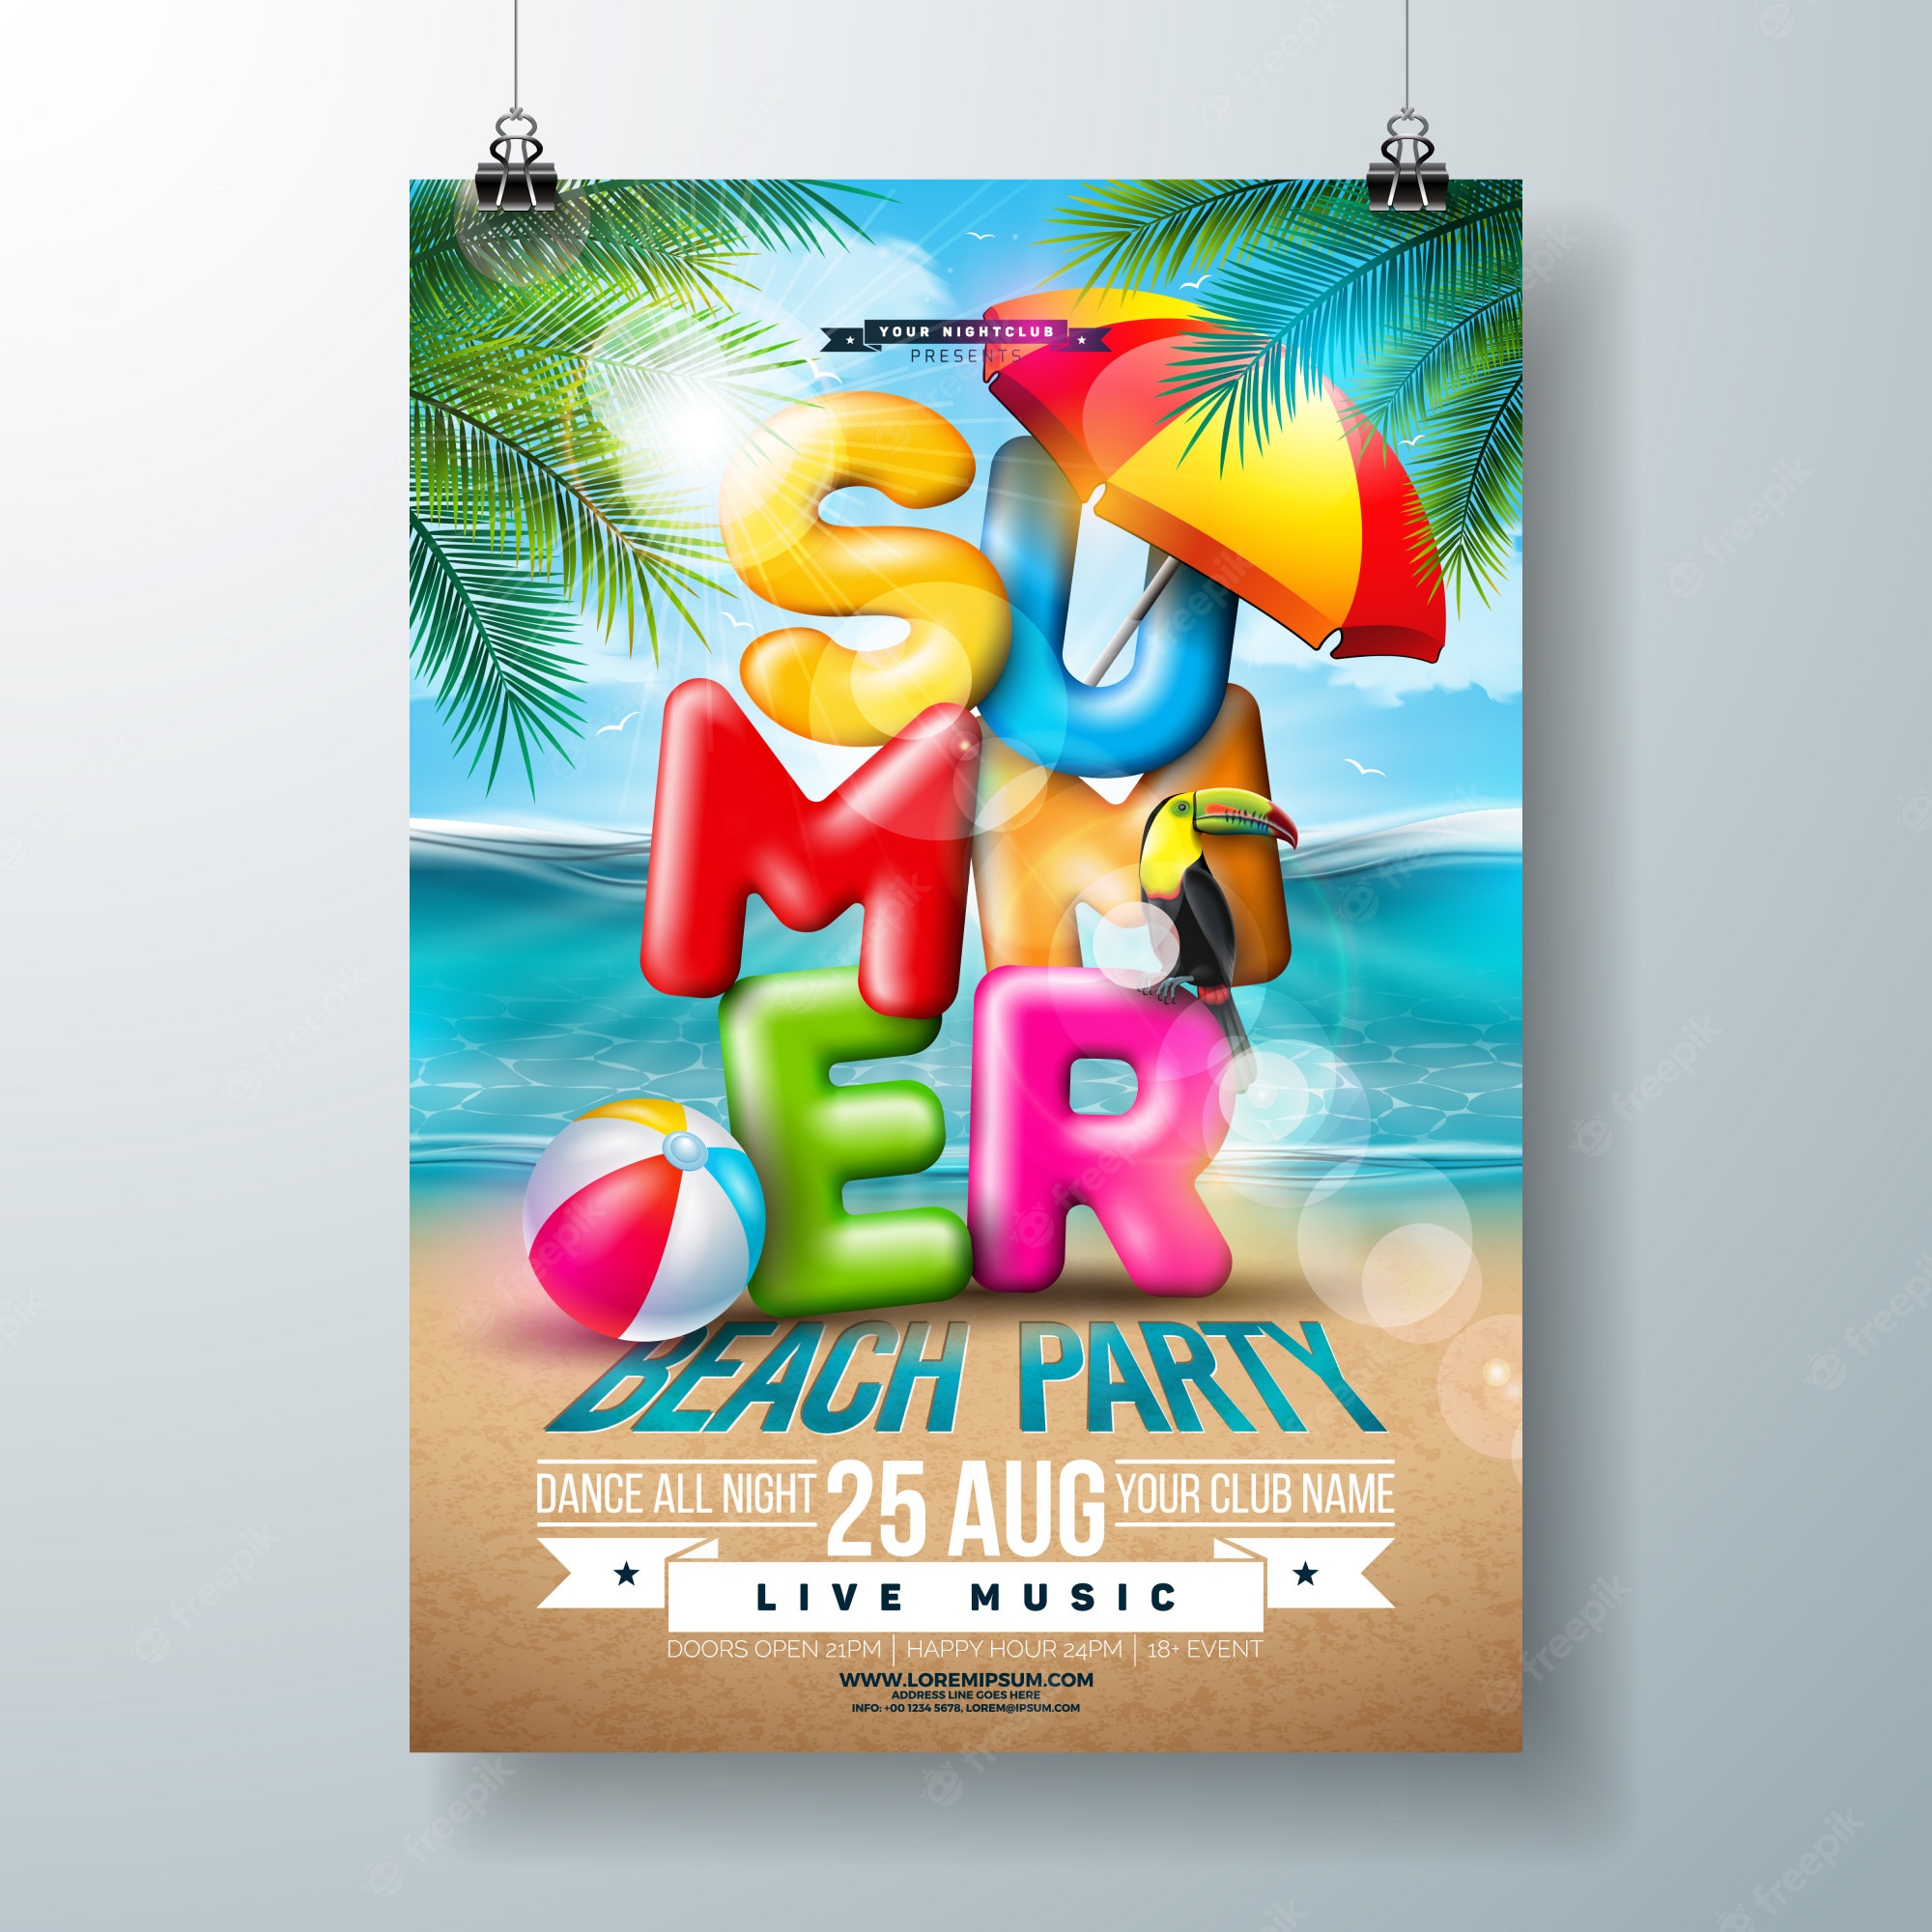 Artistic Artwork 4K  Cool Beach Party Wallpapers